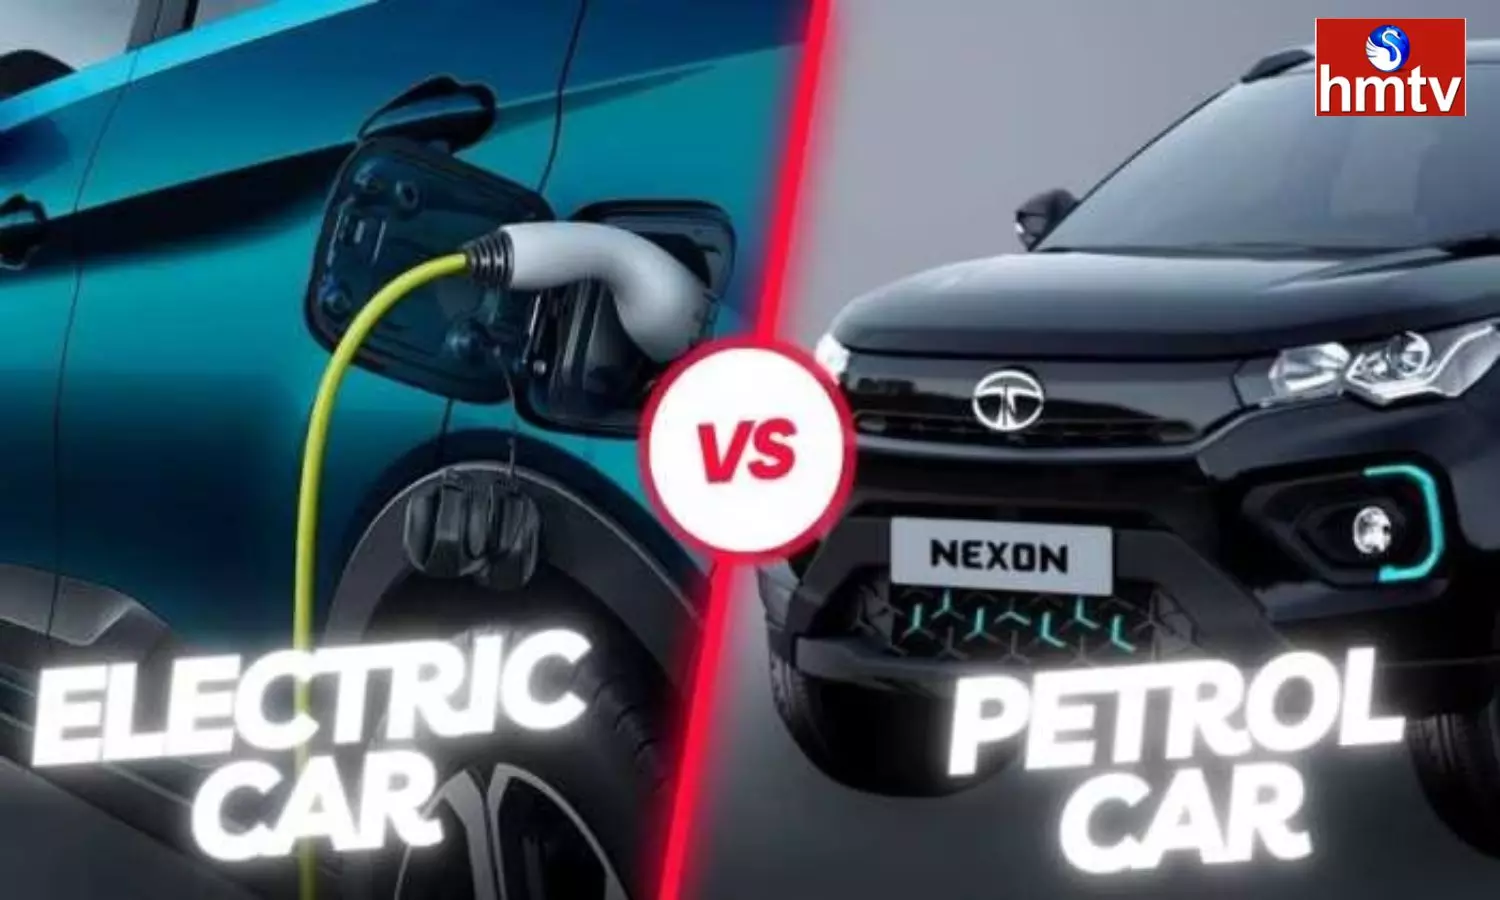 Electric Car VS Petrol Car Check Difference In Running Cost Ownership And Expenses On Maintenance